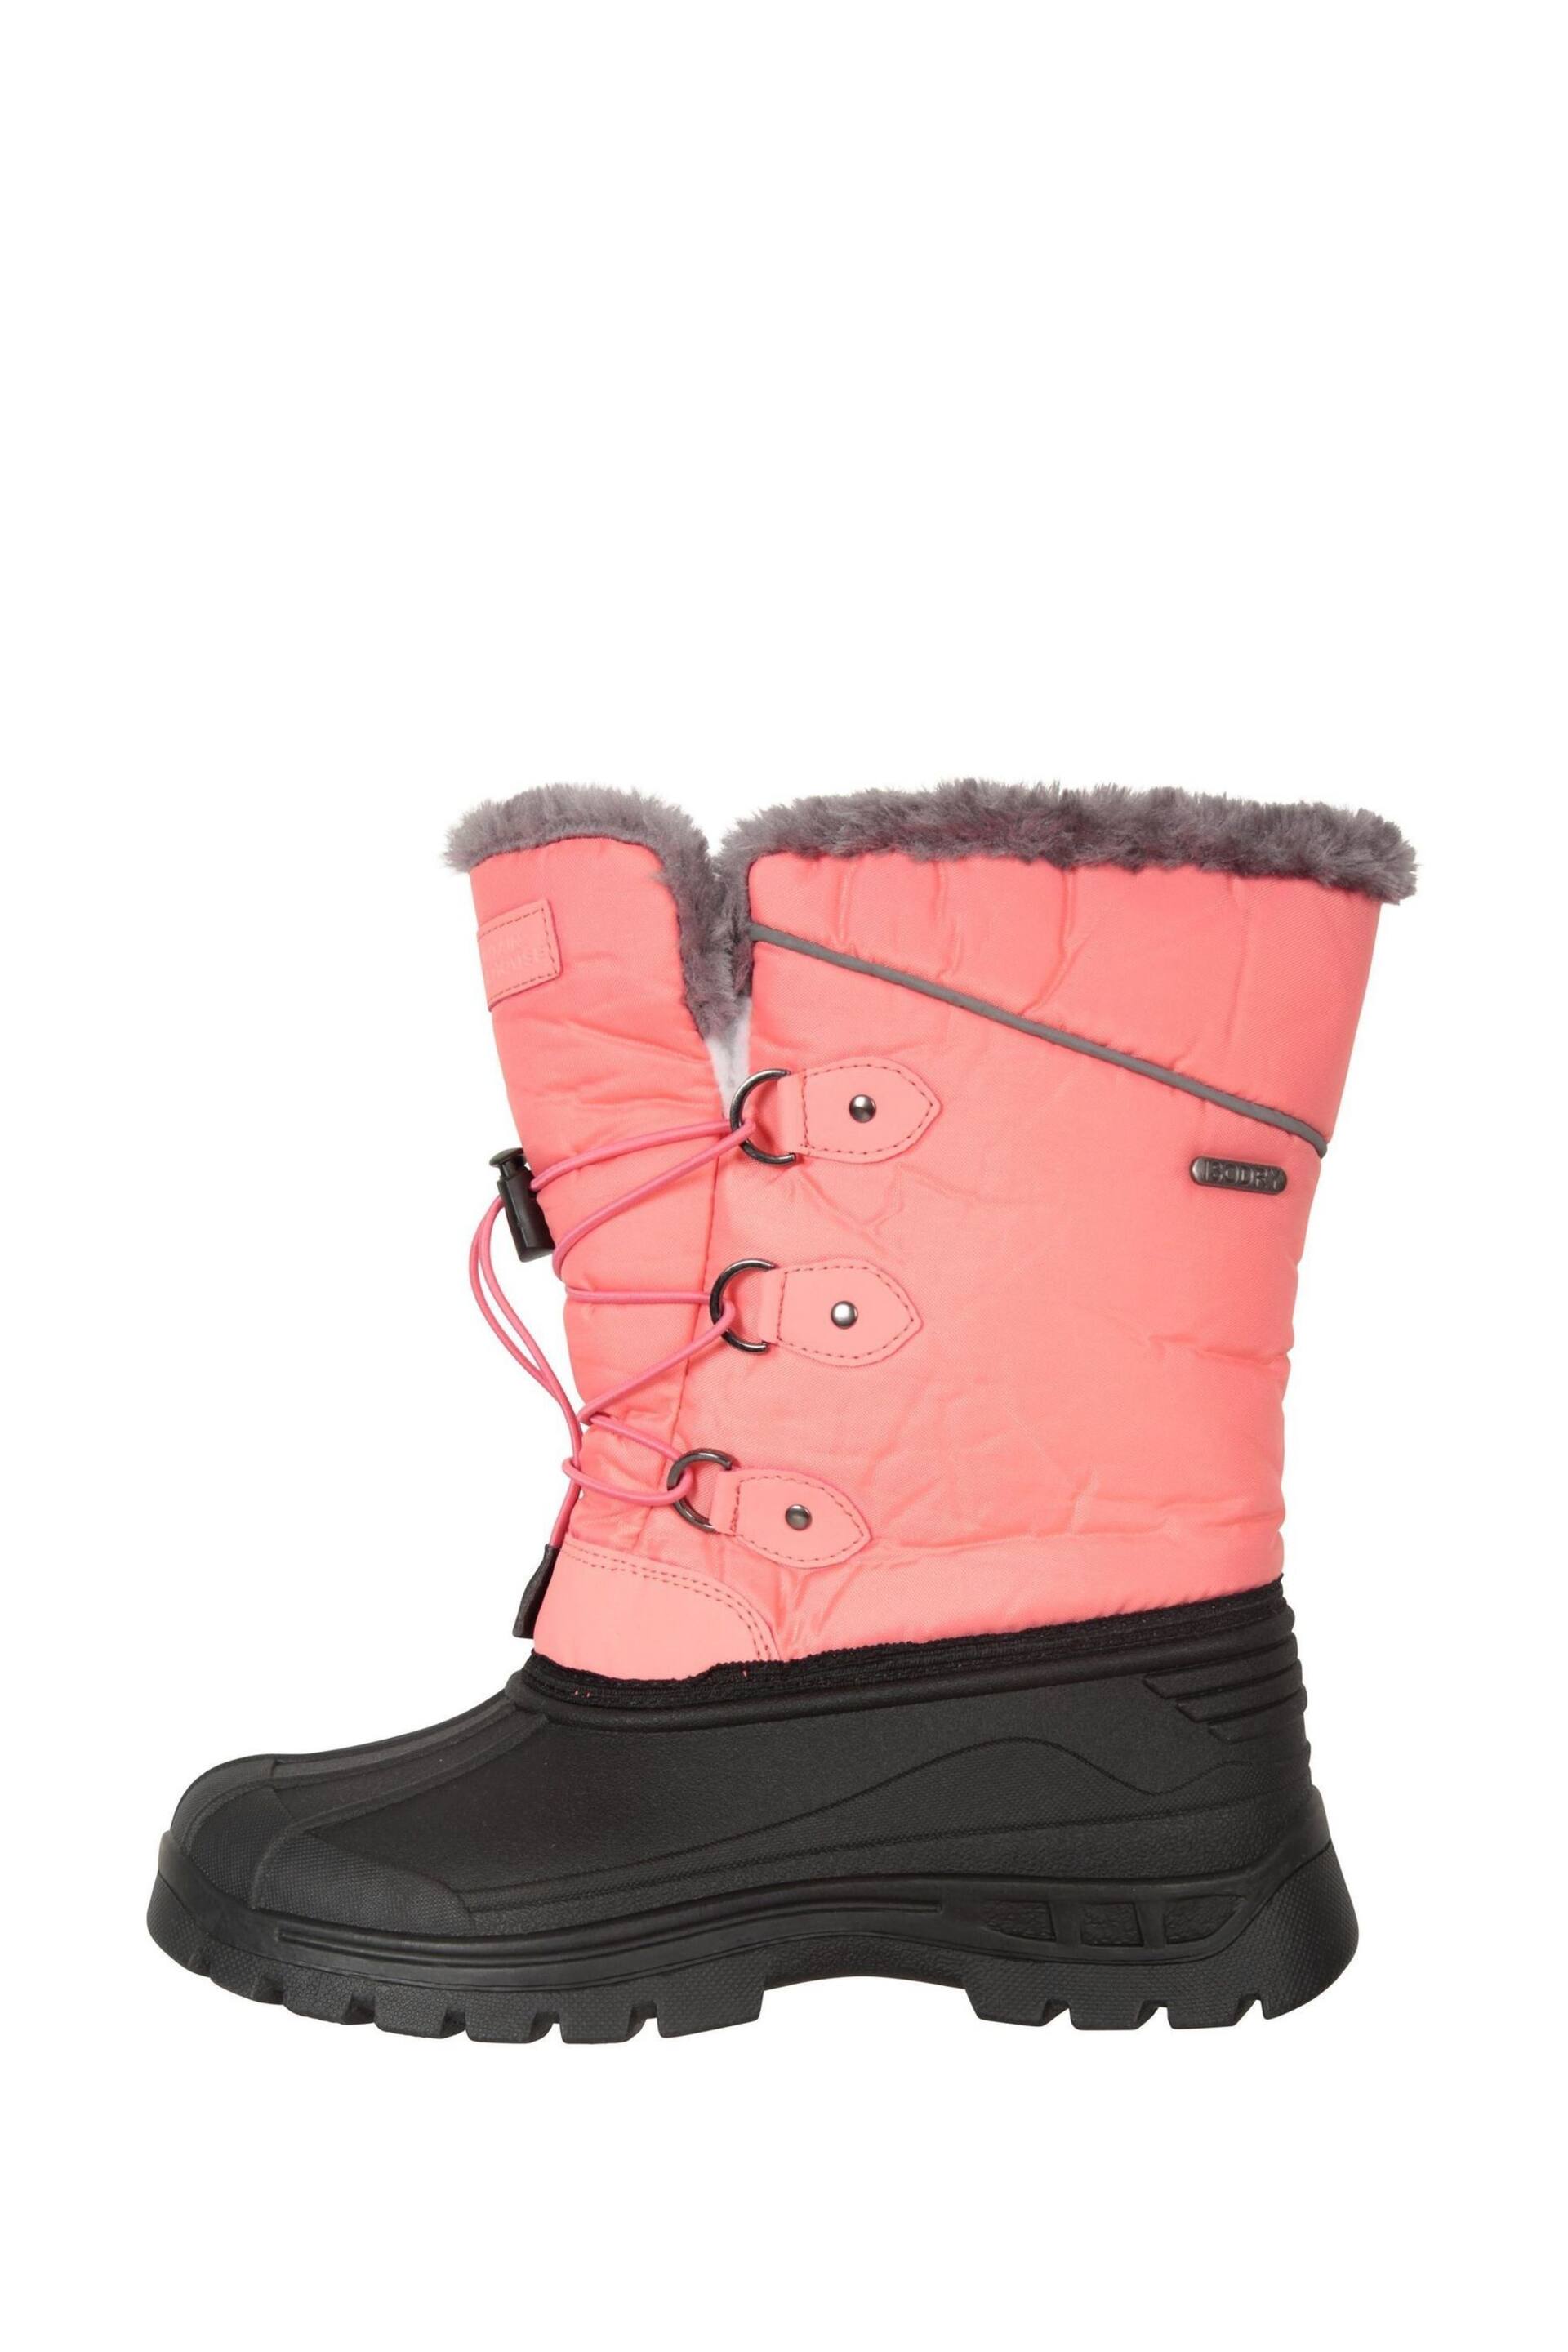 Mountain Warehouse Pink/Black Kids Whistler Sherpa Lined Snow Boots - Image 2 of 5